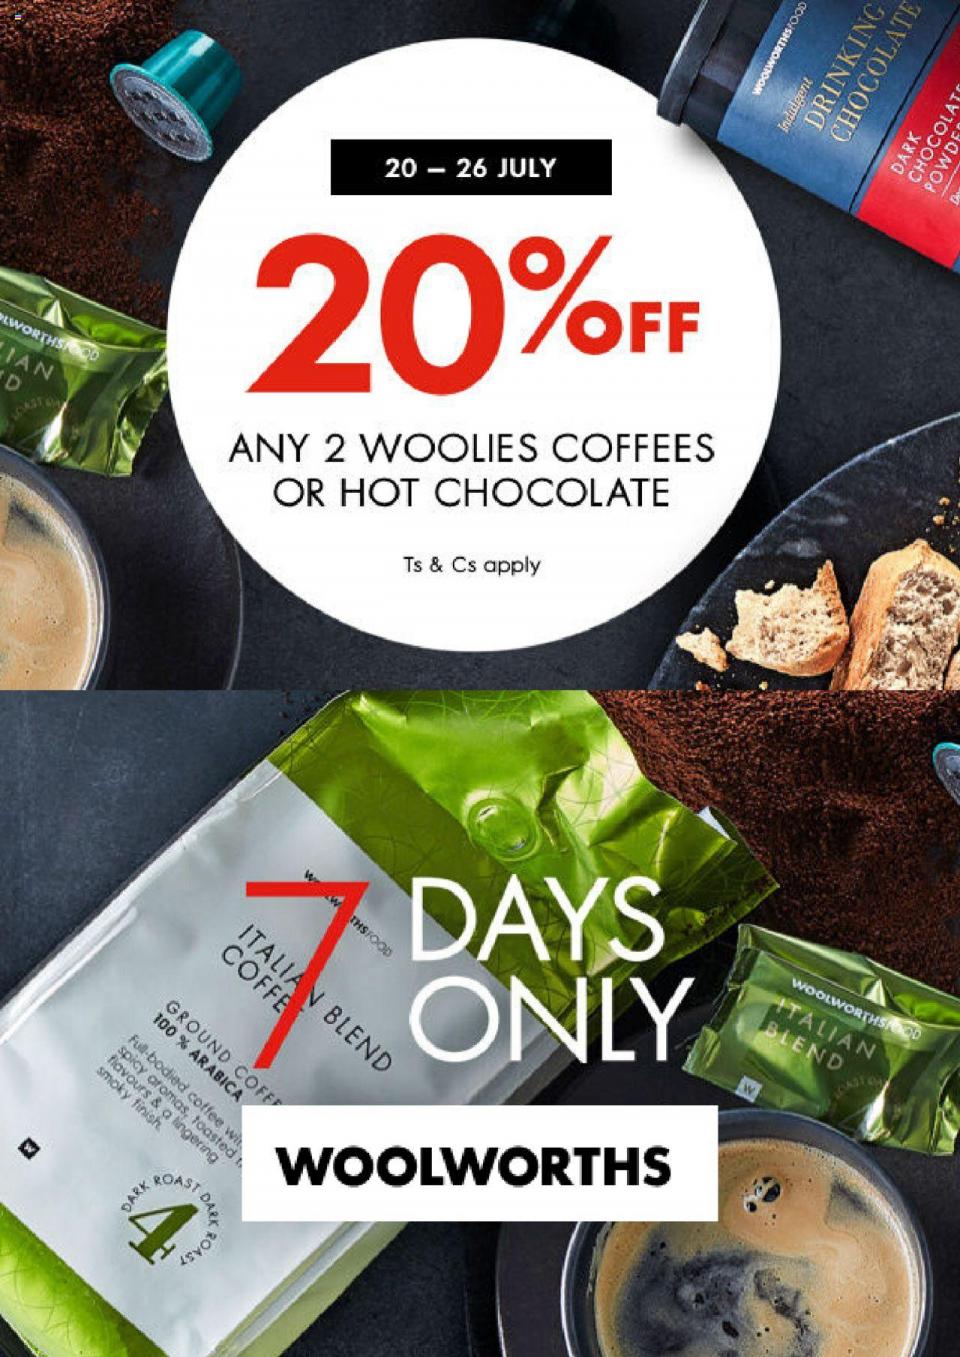 woolworths specials 20 off 20 july 2020